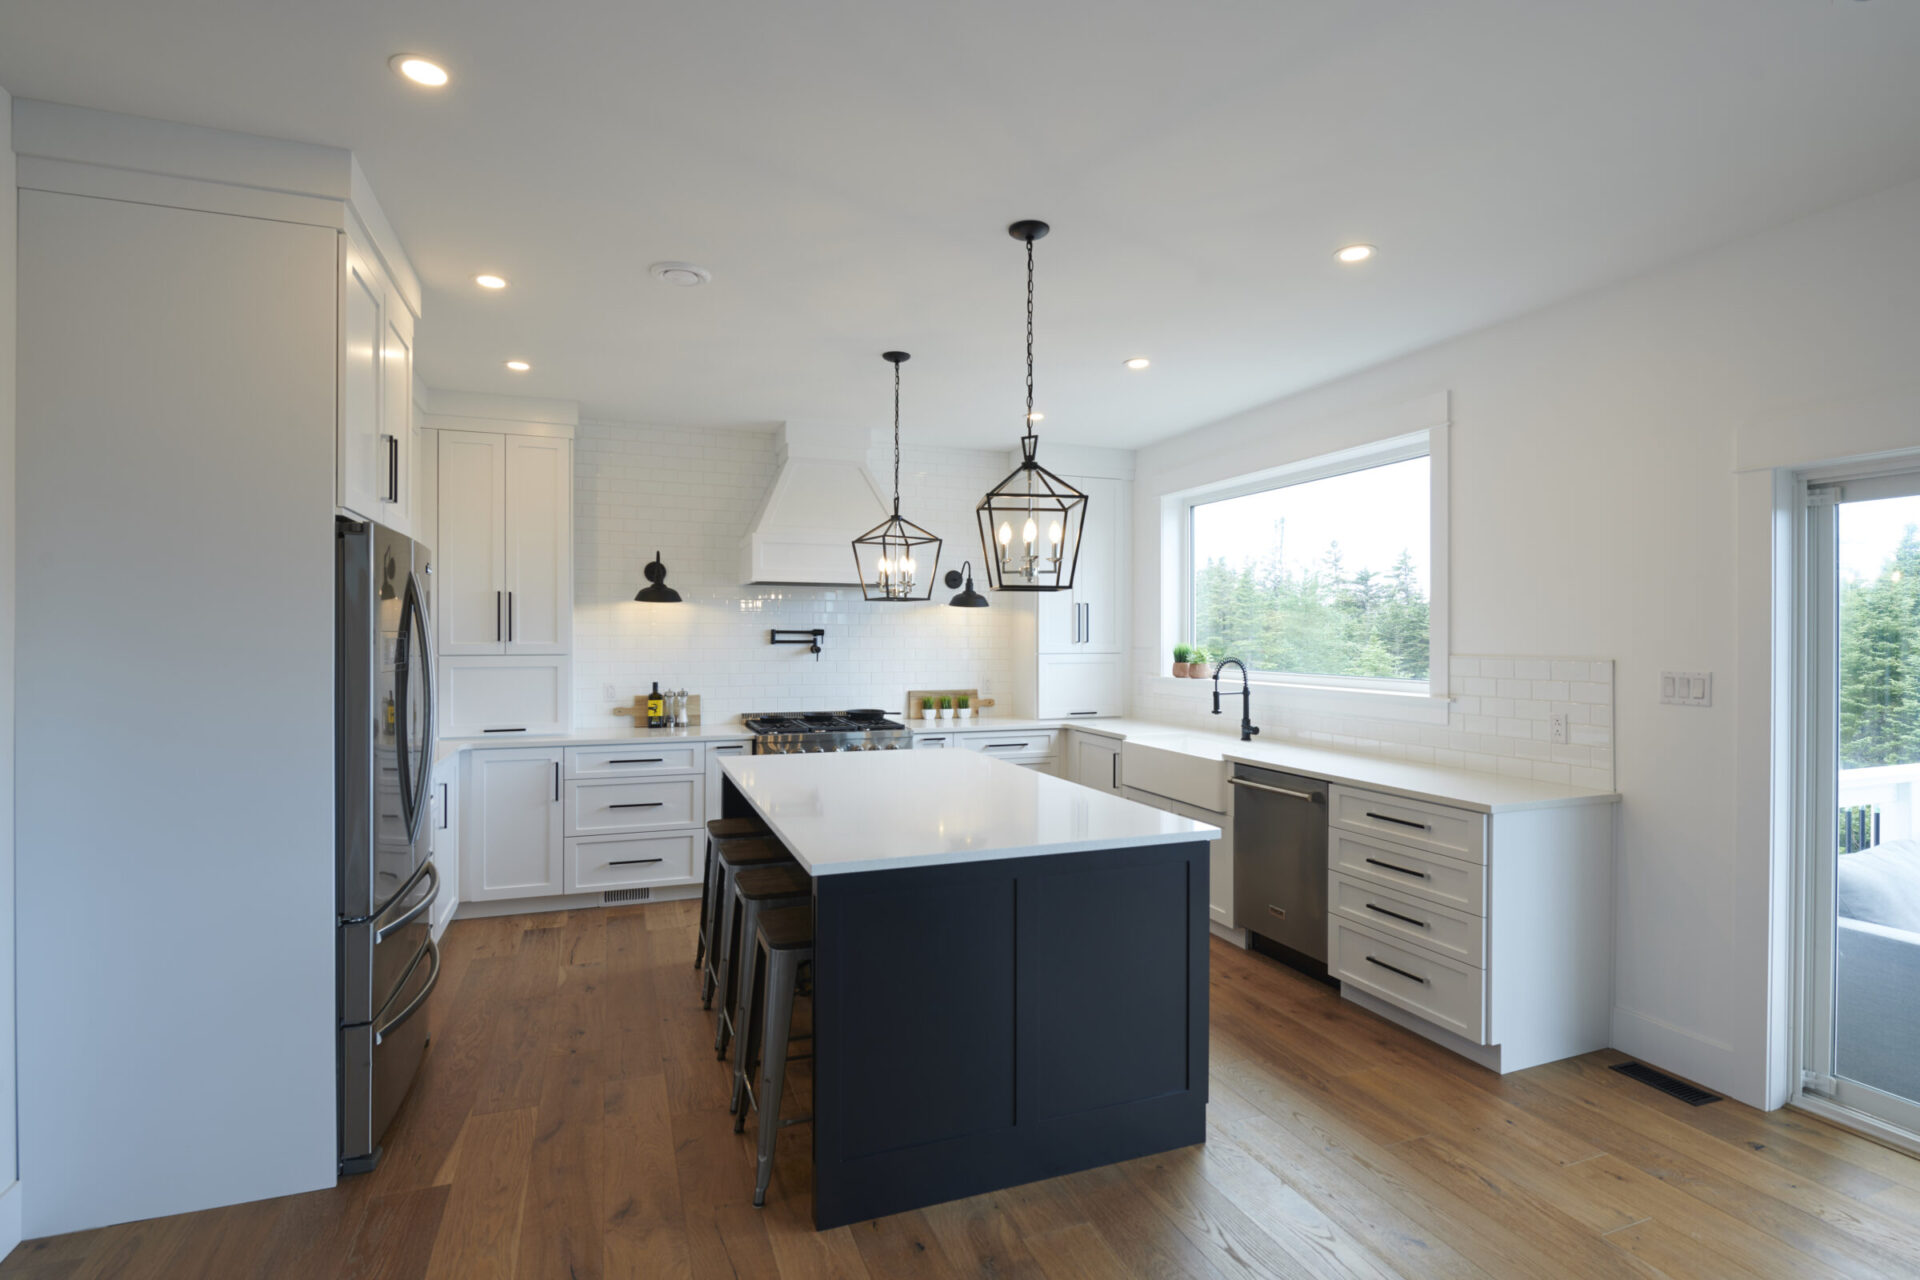 A modern kitchen with white cabinets, stainless steel appliances, dark blue island, pendant lights, subway tiles, hardwood floors, and a bright window.